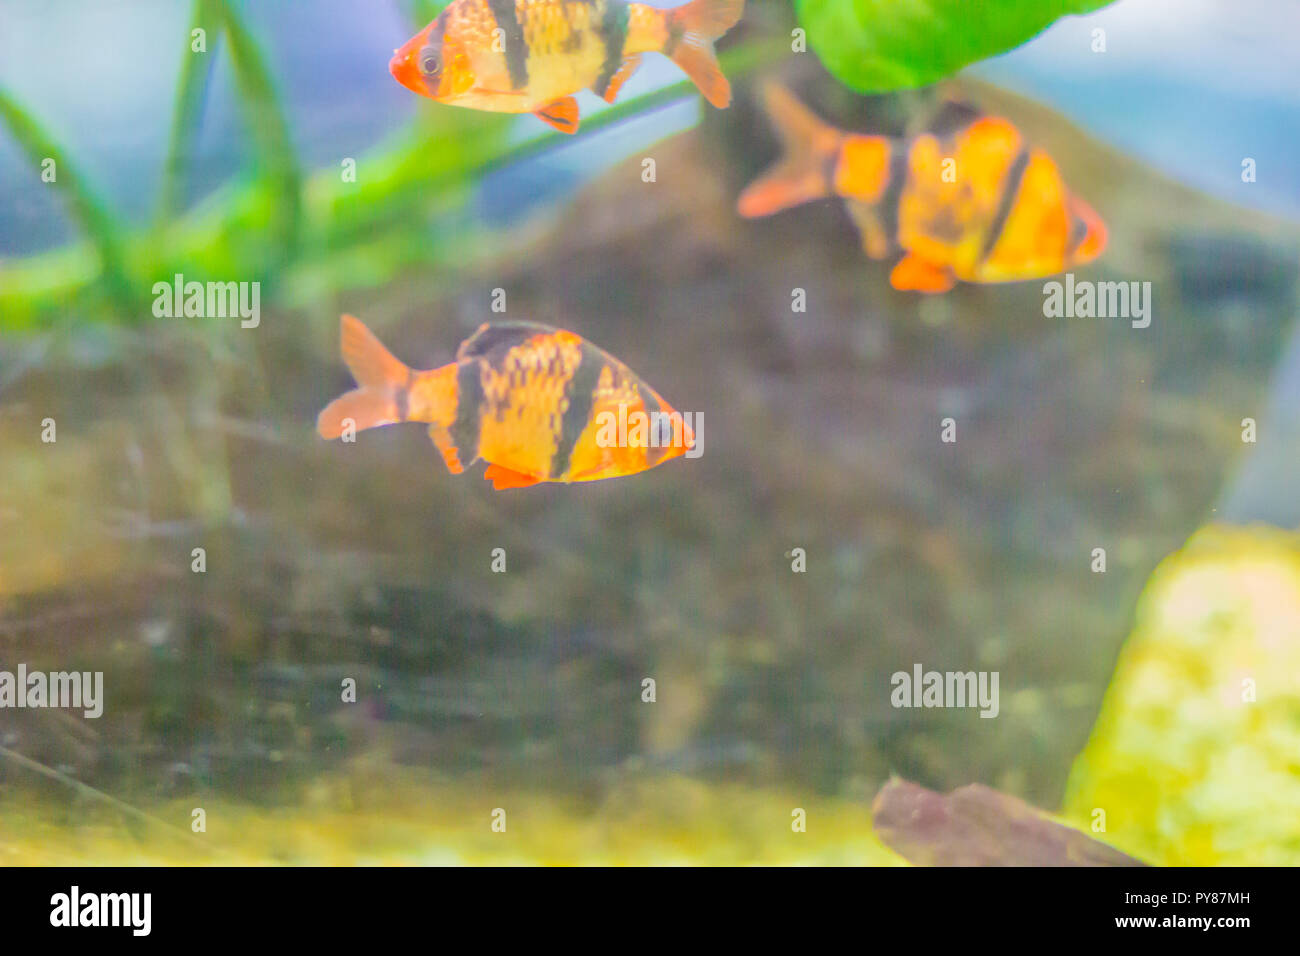 Cute tiger barb or Sumatra barb (Puntigrus tetrazona) fish in aquarium. Tiger barbs are also found in many other parts of Asia. Stock Photo